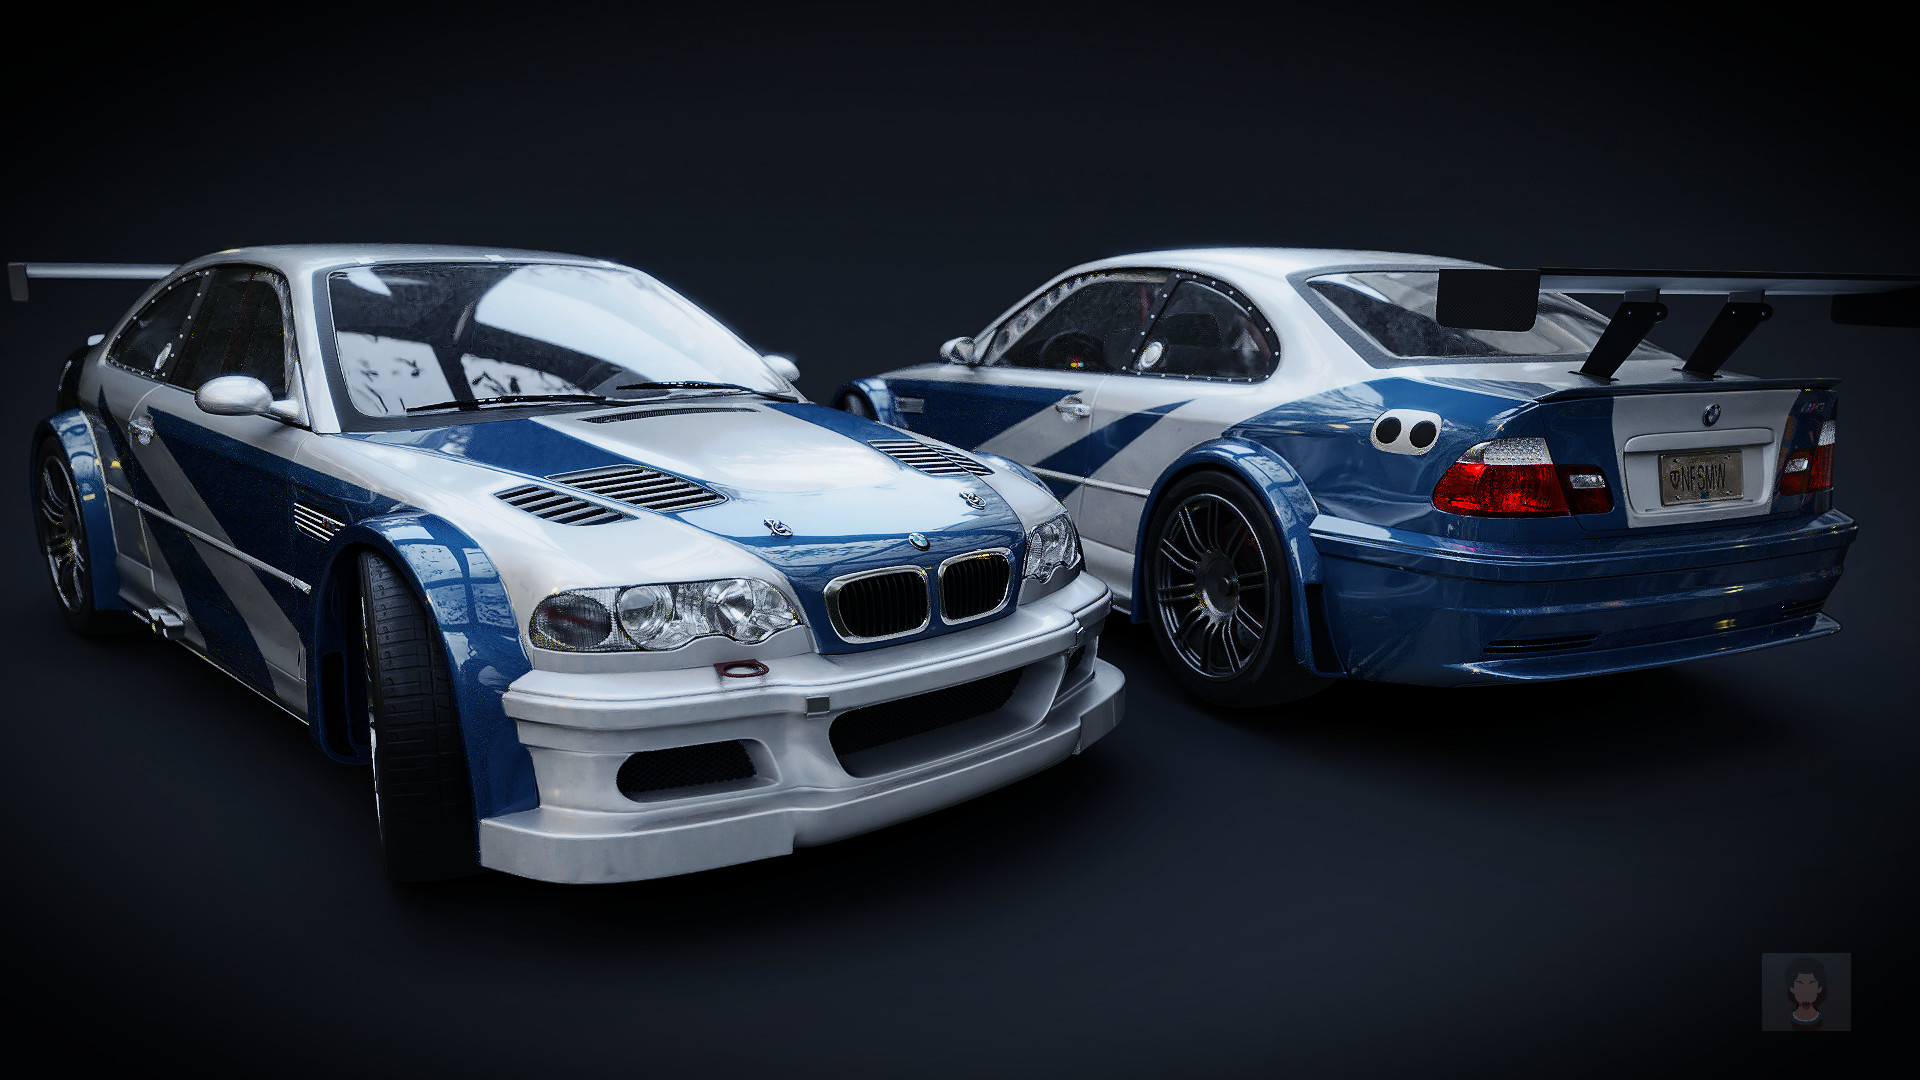 ArtStation - BMW M3 E46 4-in-1 mod for NFS Most Wanted